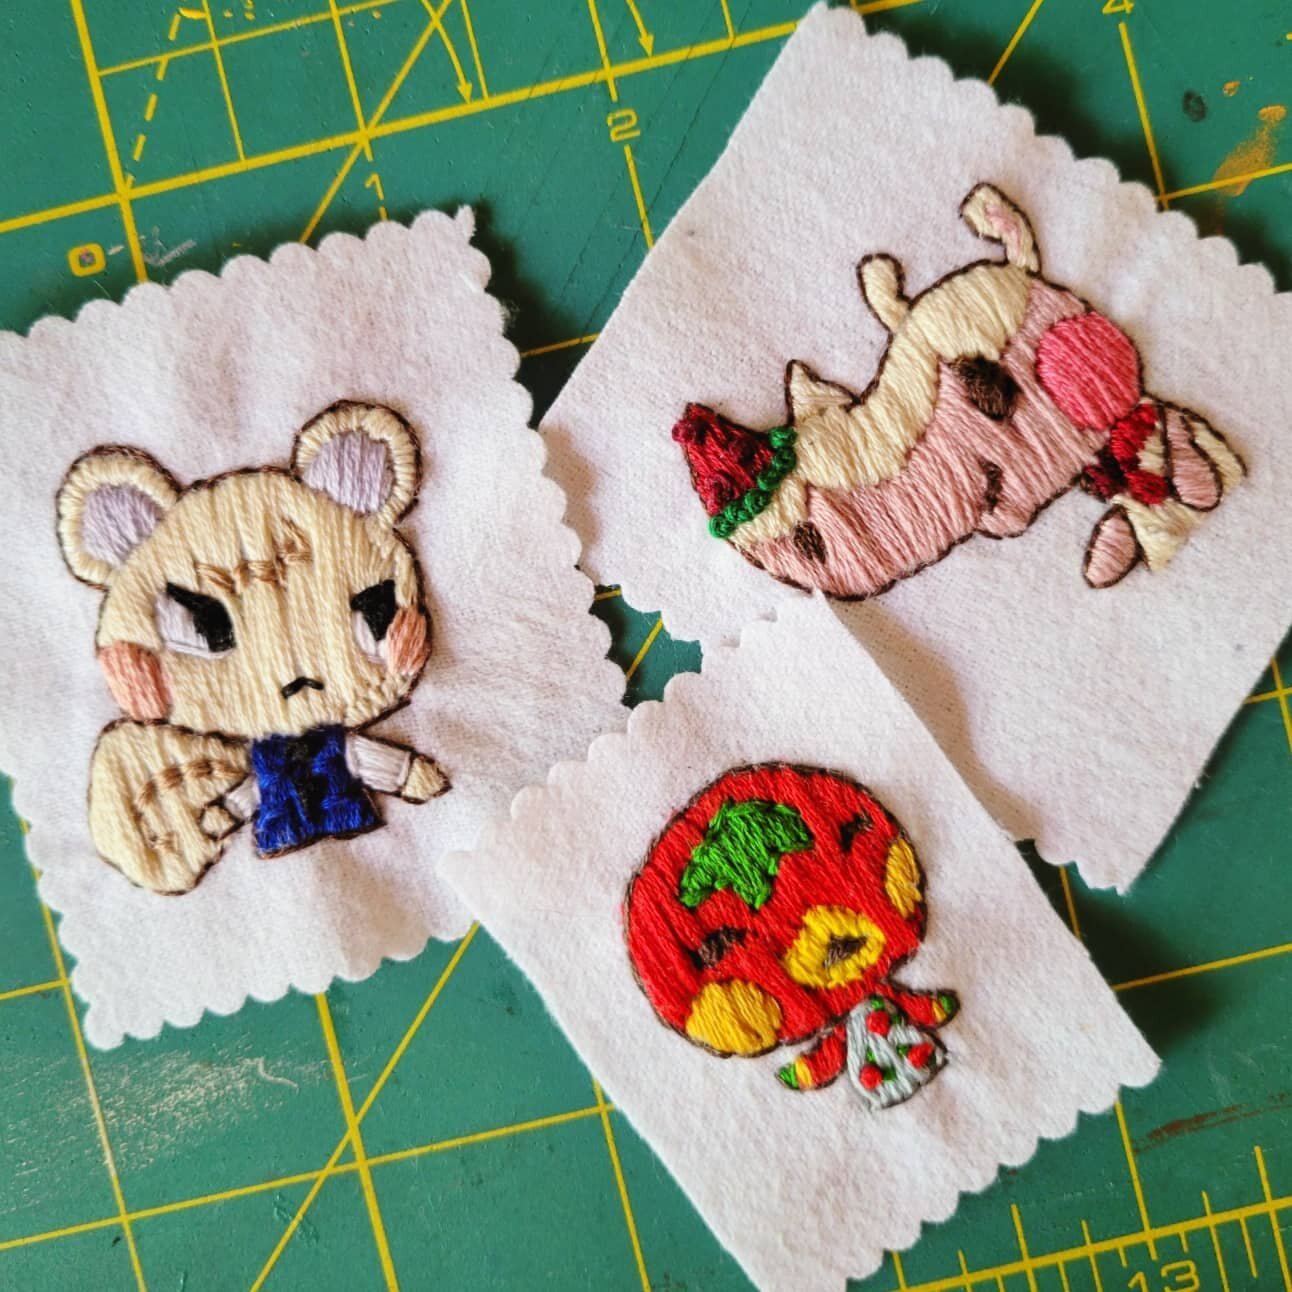 Animal Crossing embroidery done and sent out to the giveaway winners from tw1tch! 🌸🥳
.
These were so fun to make on stream! I really love embroidery 💖 it's one of those hobbies that is so relaxing, it takes you out of whatever worries or stress yo